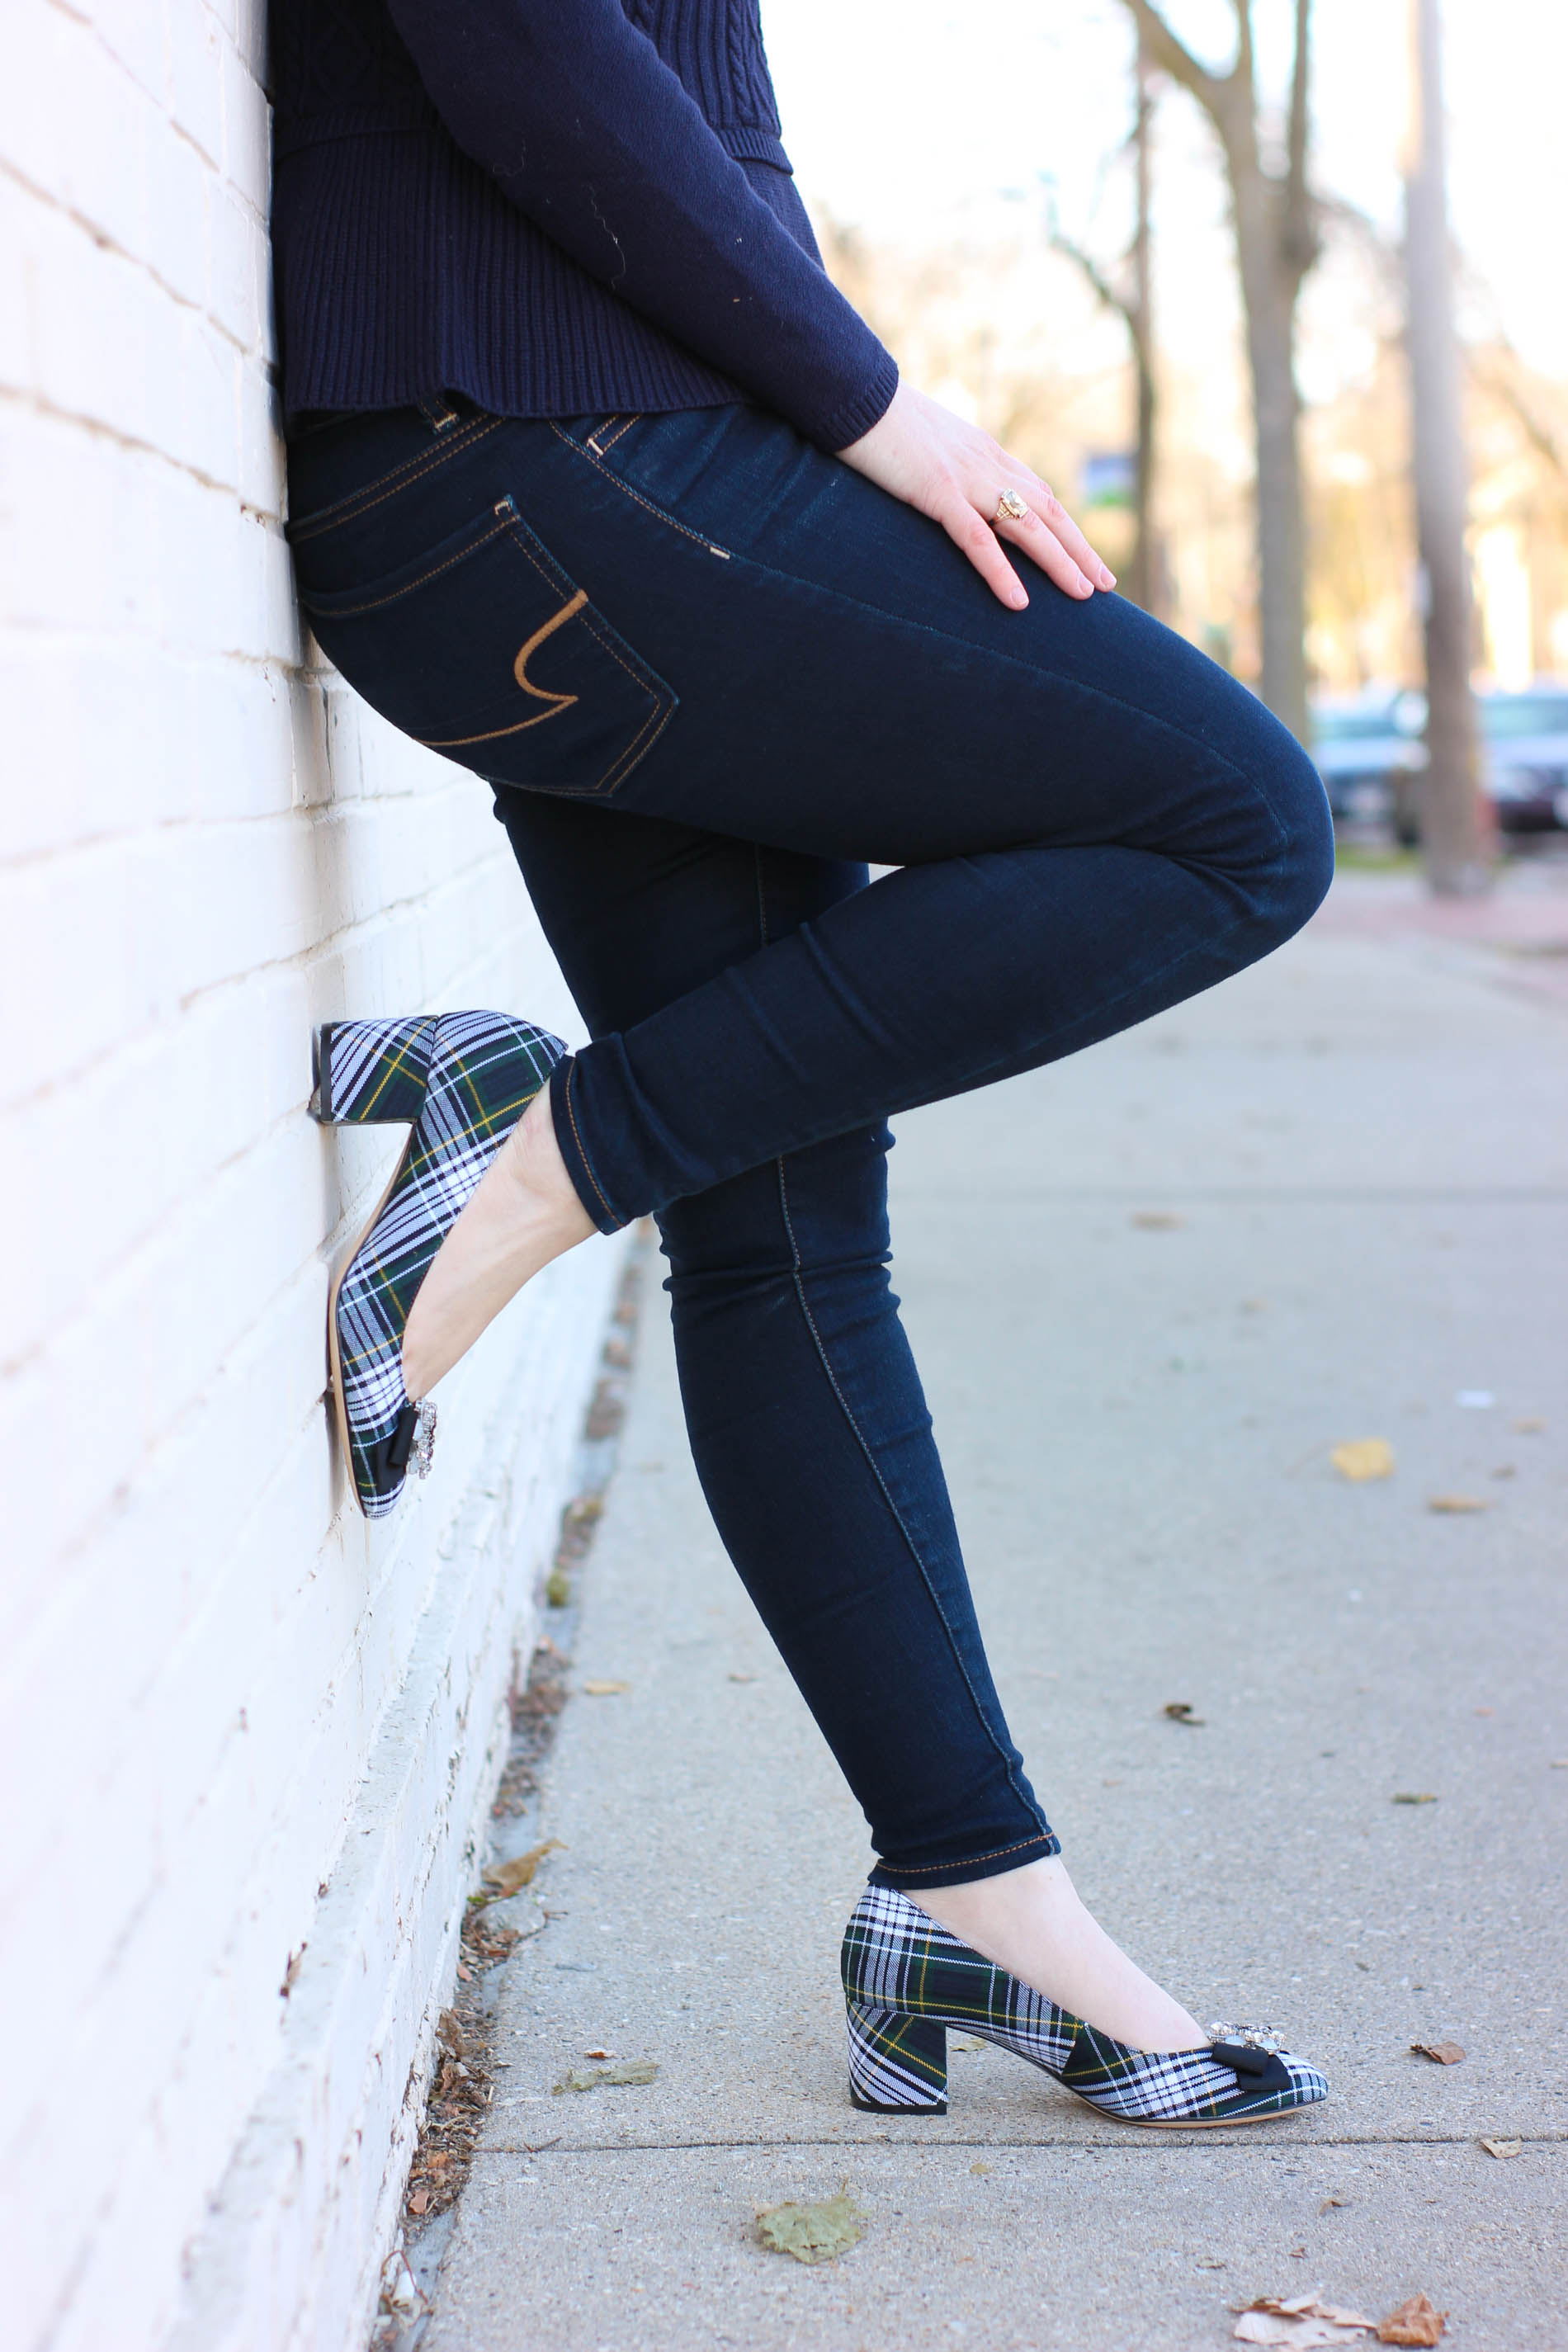 Cyber Monday Deals at Talbots | Something Good, , @danaerinw , plaid heels, jeggings, jeans